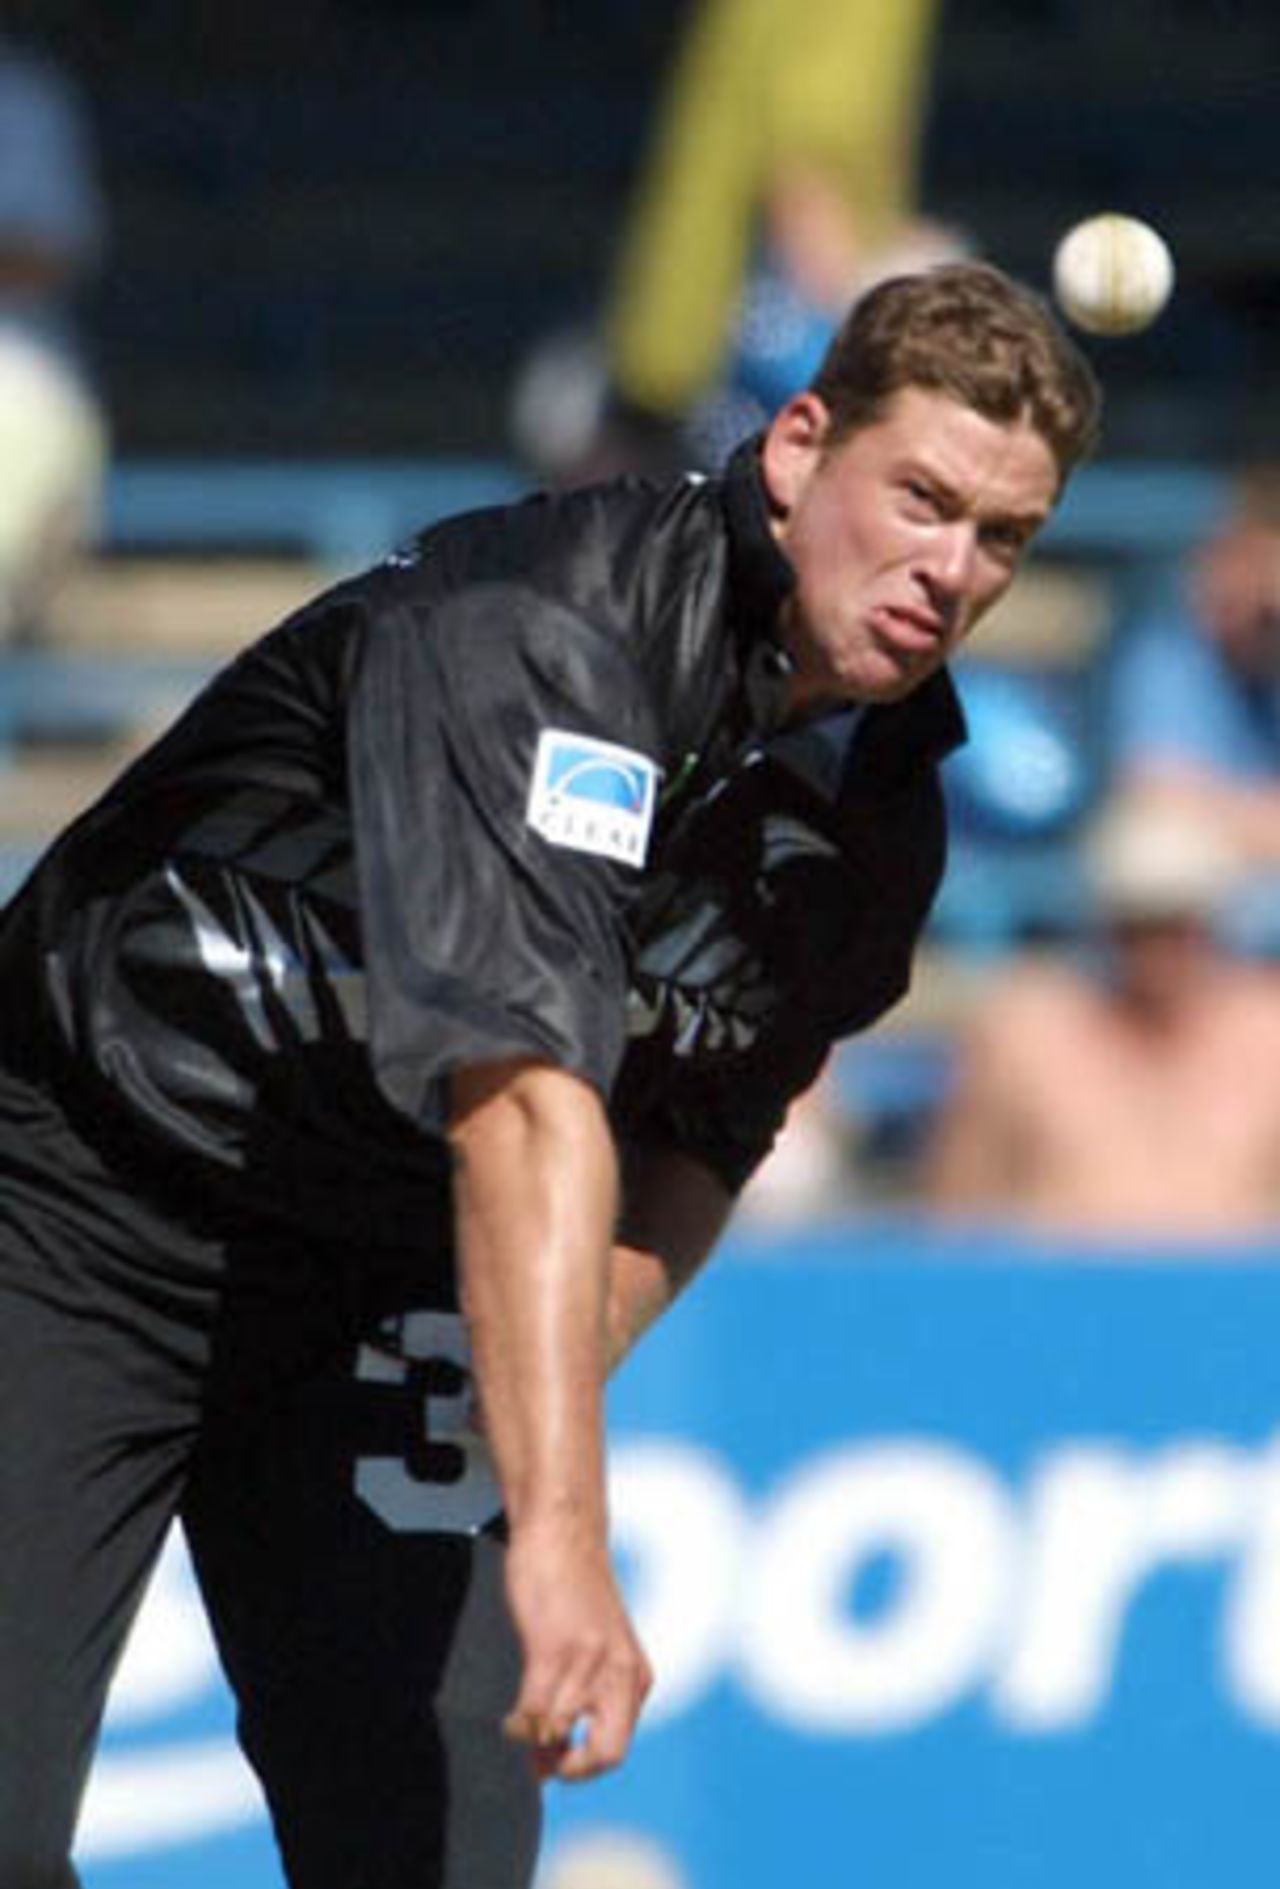 New Zealand medium fast bowler Jacob Oram delivers a ball during his spell of 2-49 from nine overs. 5th One-Day International: New Zealand v Pakistan, Carisbrook, Dunedin, 28 February 2001.